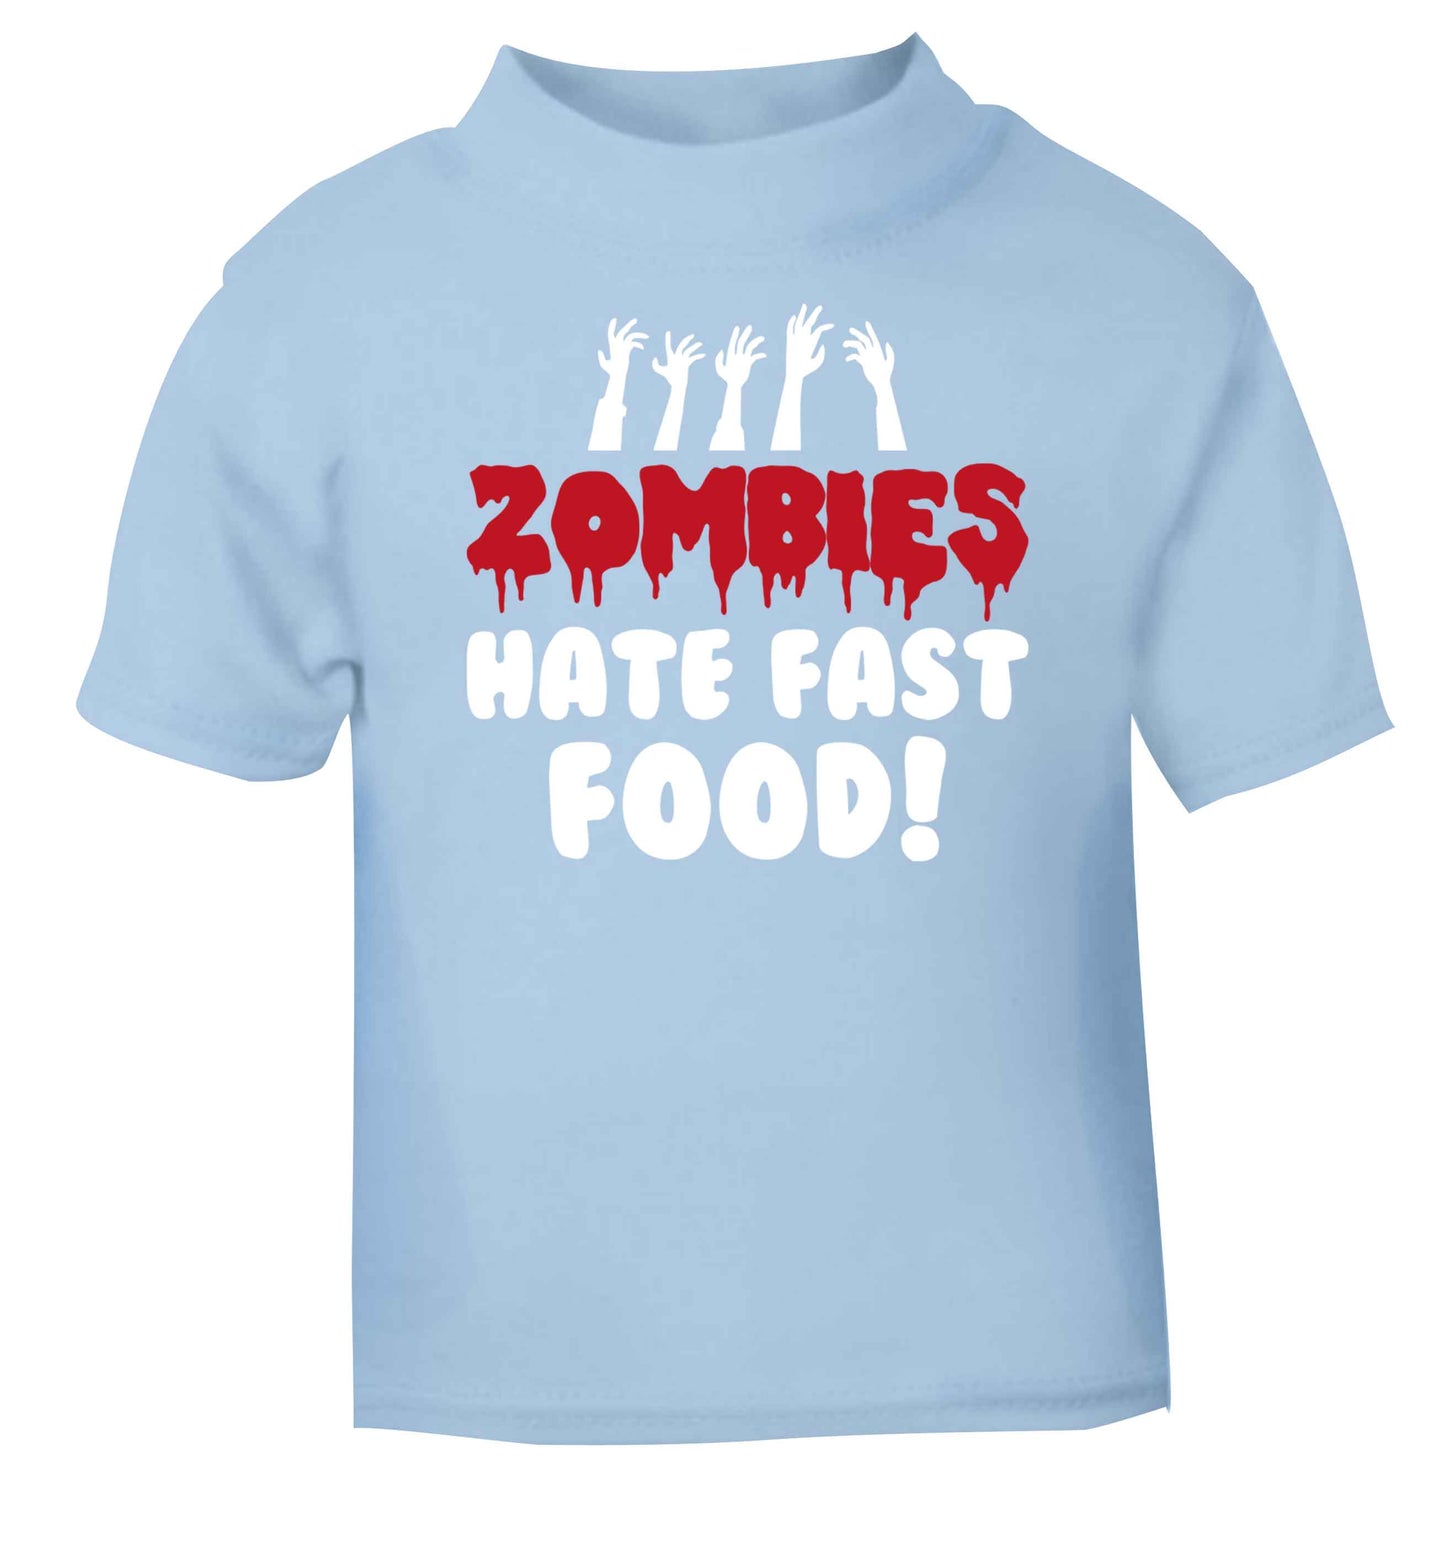 Zombies hate fast food light blue baby toddler Tshirt 2 Years